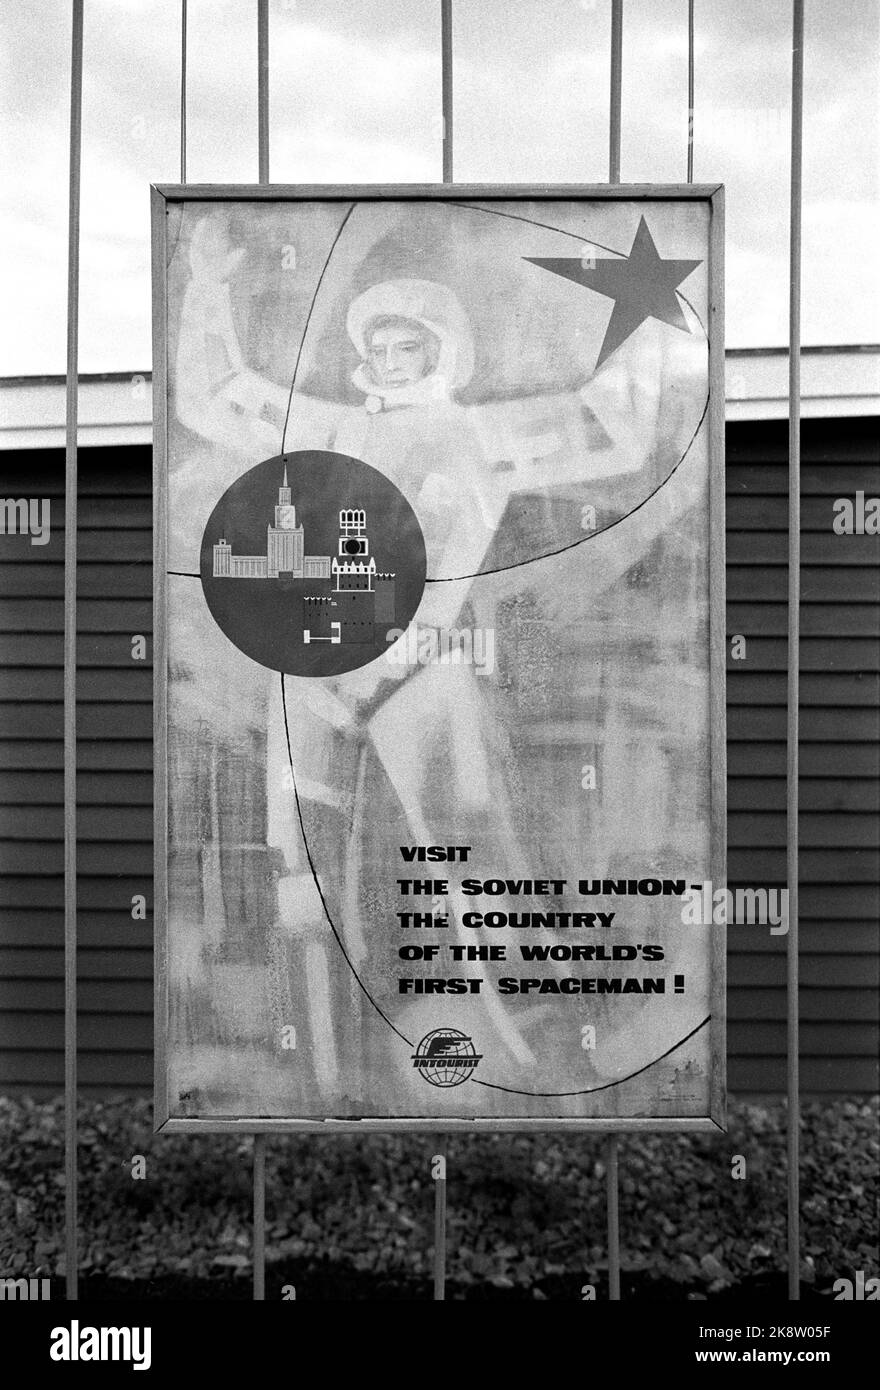 Boris Gleb, Soviet April 1965. 'Russian tourist weapons: Vodka'. Visa -free access to the Soviet Union. Boris Gleb can tempt with an art exhibition, cinema and visits to the power plant, but the foremost lure is Vodka. Here is a poster from the state tourist agency Intourist who lures tourists to the Soviet Union. Photo: Sverre A Børretzen / Current / NTBSCANPIX. Stock Photo